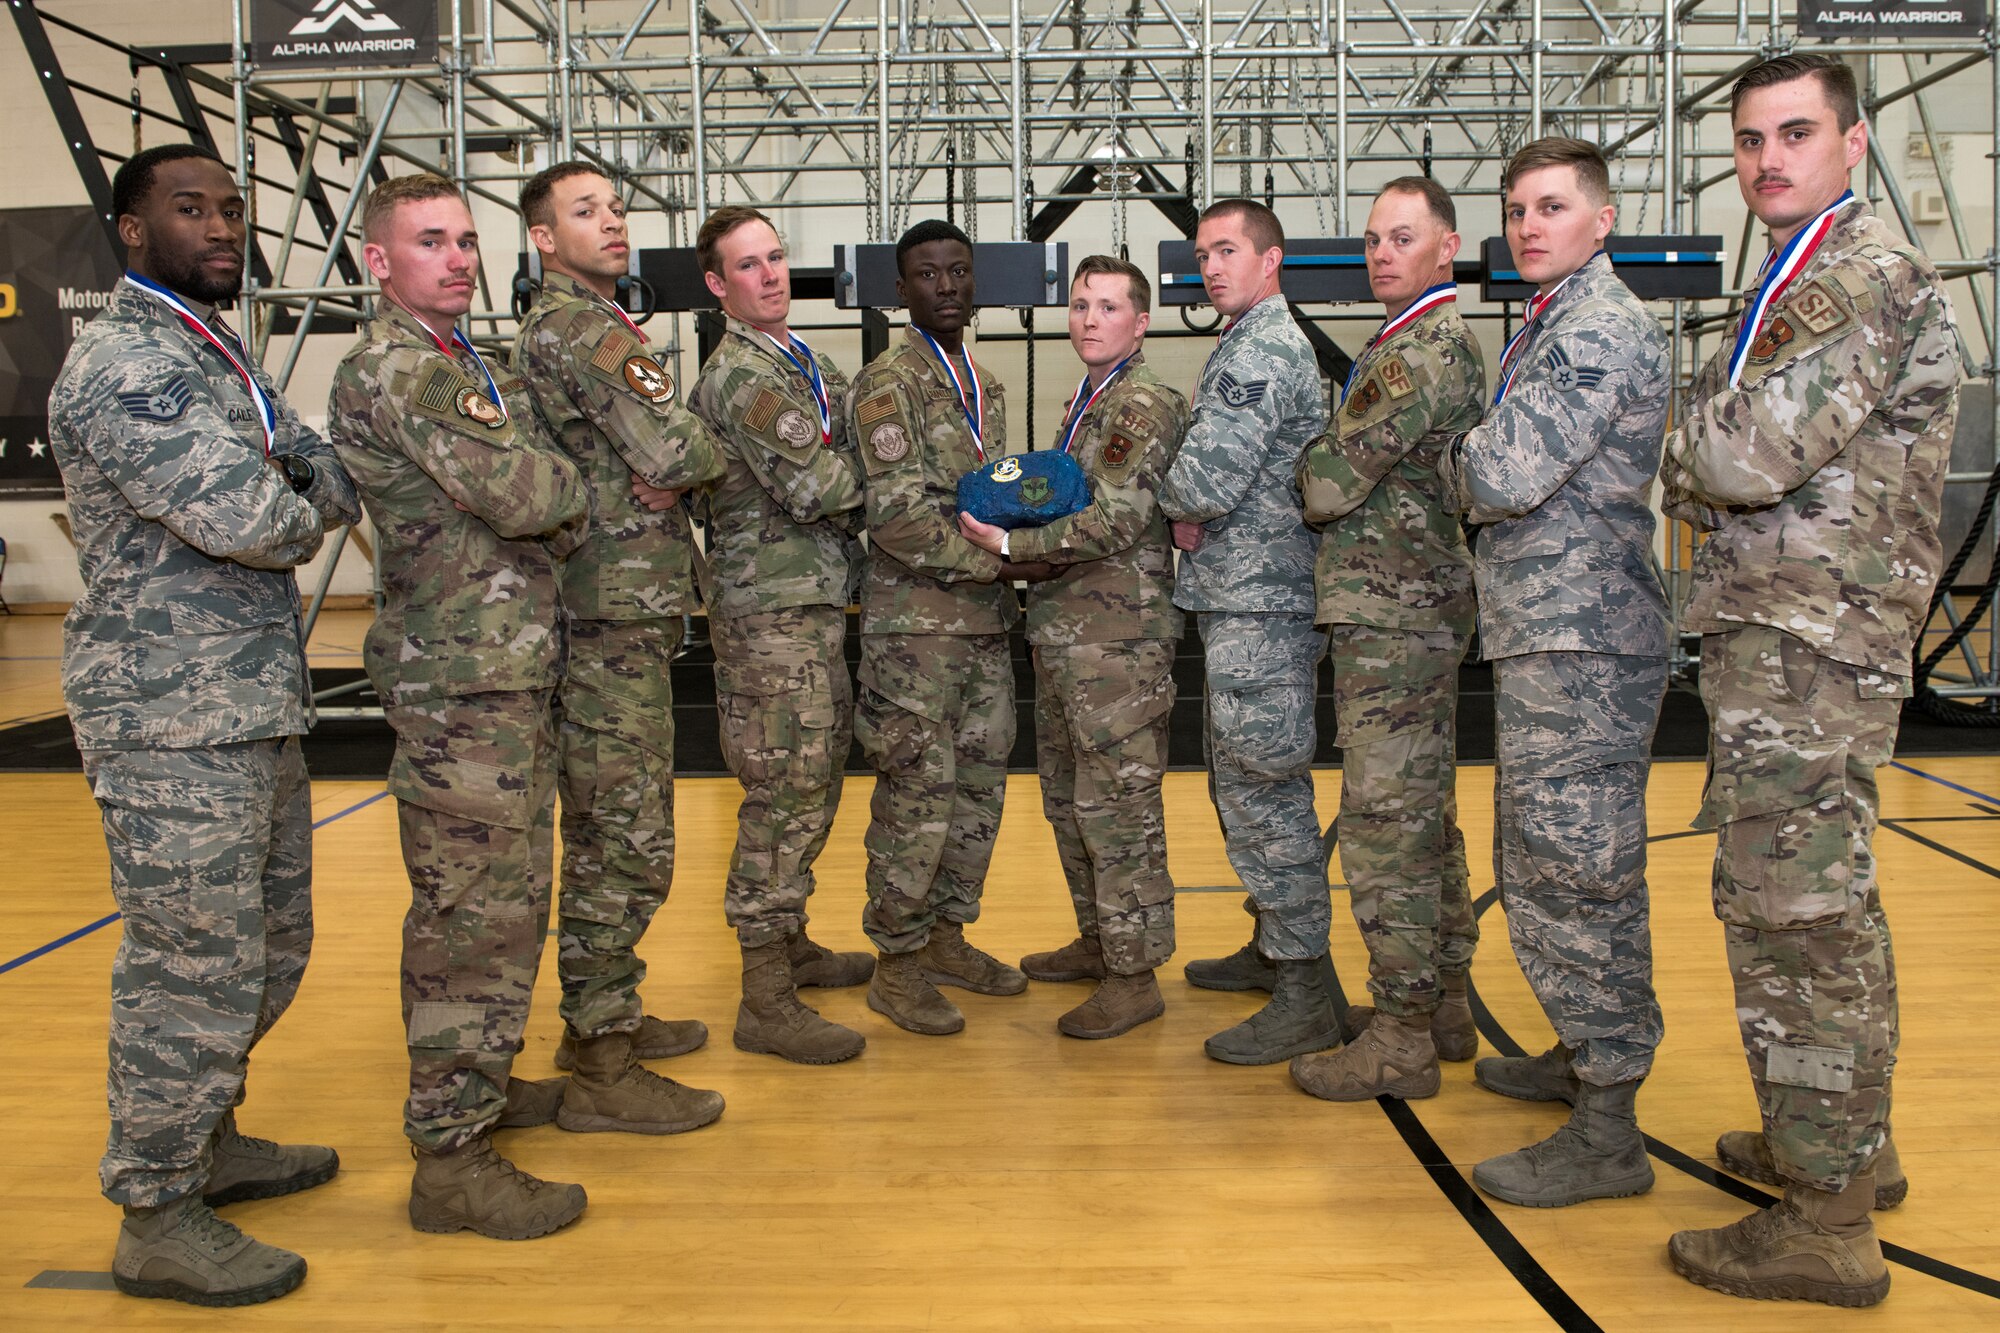 U.S. Air Force Security Forces Airmen pose for a photo after being selected to represent AETC’s team, Jan. 31, 2020, at Joint Base San Antonio-Medina Annex. The seven selectees to the AETC team will represent the First Command at the career field’s world-wide competition that will be held at JBSA-Camp Bullis in May 2020. (From left to right) Staff Sgt. Isreael Camille (alternate), 37th Training Support Squadron, JBSA-Lackland; Senior Airman Jonathan Hardy, 97th Security Forces Squadron, Altus Air Force Base, Okla.; Senior Airman Craig Smith, 71st Security Forces Squadron, Vance Air Forces Base, Okla.; Airman 1st Class Ryan Franklin, 802nd Security Forces Squadron, JBSA-Lackland; Staff Sgt. Wilson Brantley, 802nd Security Forces Squadron military working dog handler, JBSA-Lackland; Staff Sgt. William McLaughlin, 502nd Security Forces Squadron, JBSA-Ft. Sam Houston; Staff Sgt. Jesse Daniel, 81st Security Forces Squadron; Master Sgt. Sean McDermott (alternate), 56th Security Forces Squadron, Luke Air Force Base, Ariz.; Senior Airman Paul Cupp, 42nd Security Forces Squadron, Maxwell-Gunter Air Force Base, Ala.; Senior Airman Andrew Vance (alternate), 902nd Security Forces Squadron military working dog handler, JBSA-Randolph. (U.S. Air Force photo by Sarayuth Pinthong)